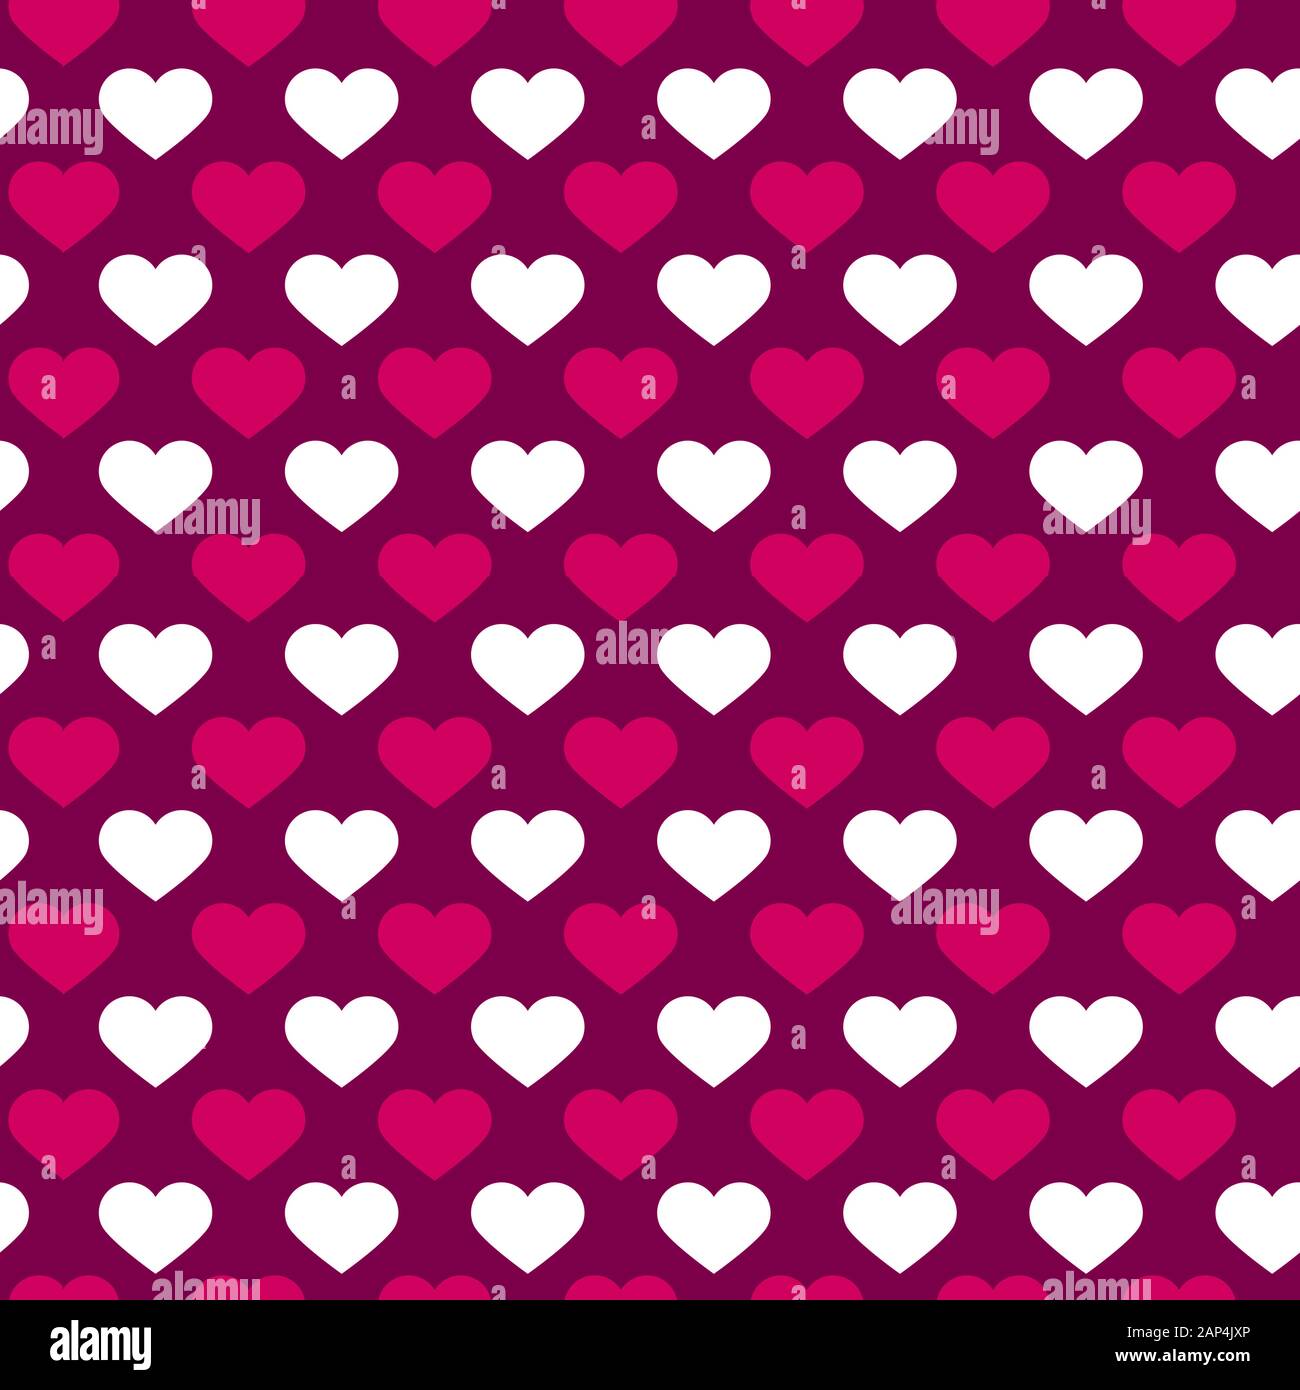 Seamless patterns with pink and white hearts, polka dot. Seamless background with hearts. Valentine's Day. Gift wrap, print, cloth, cute background fo Stock Photo